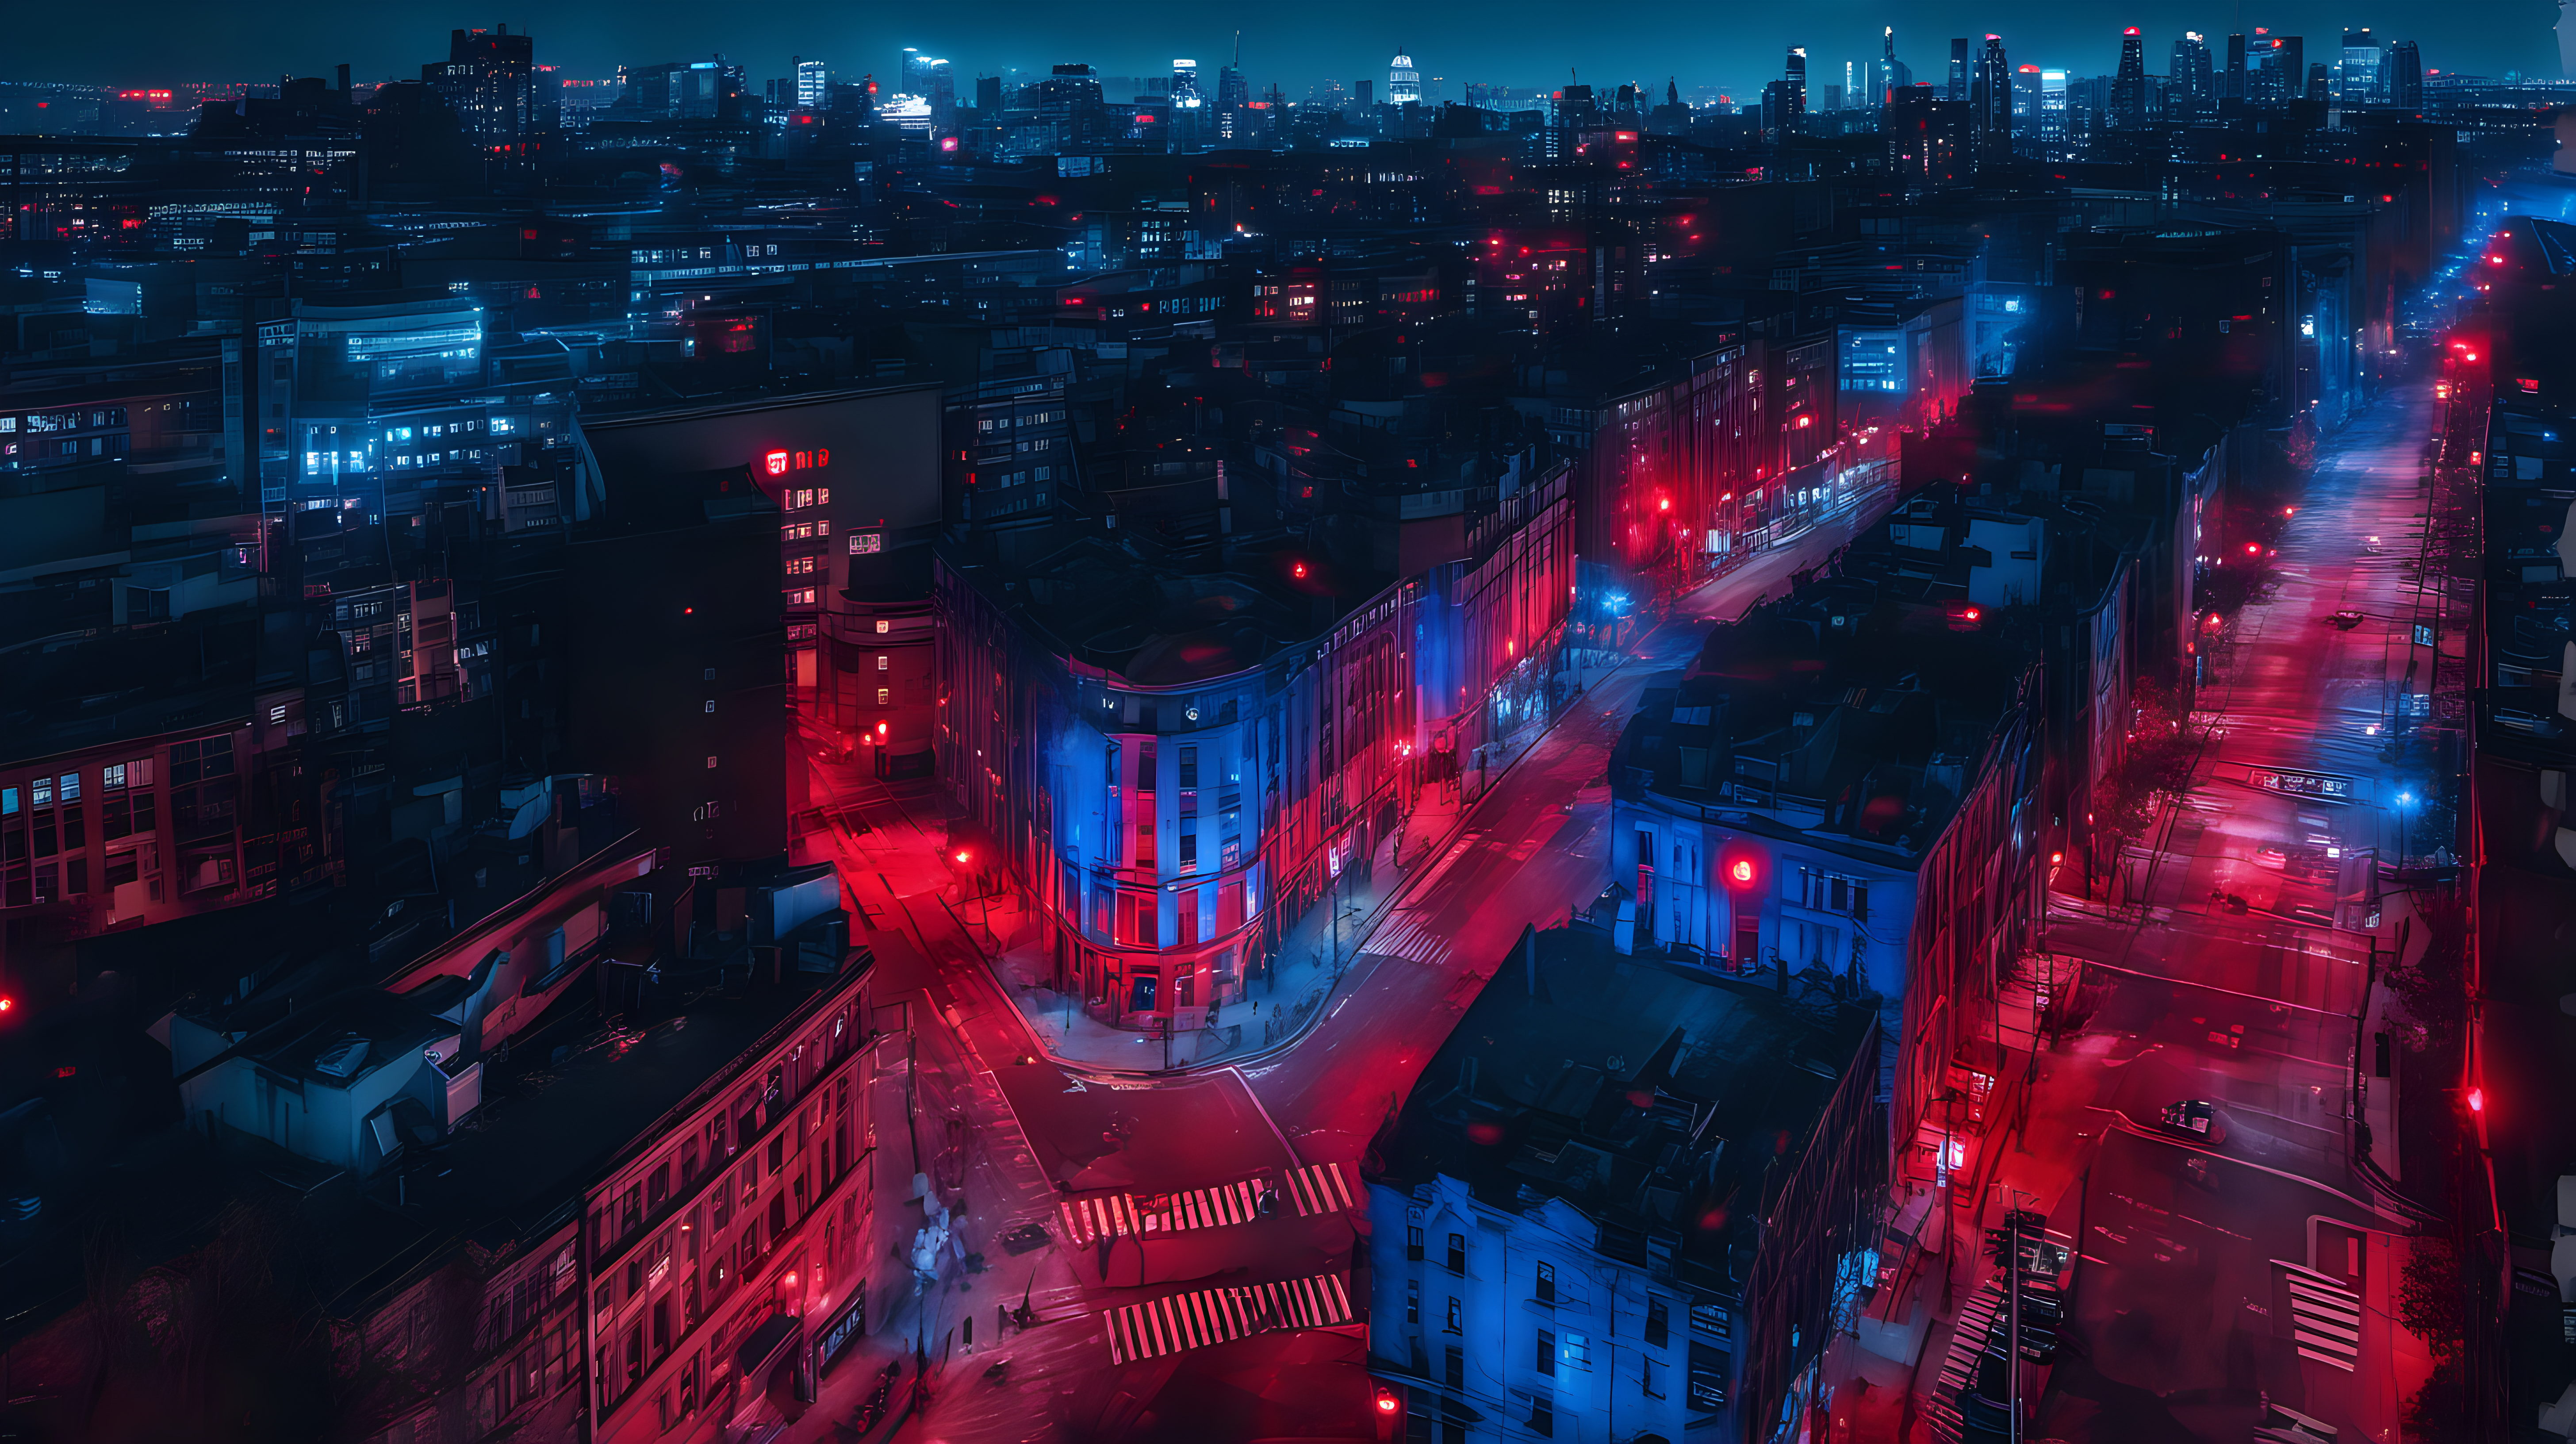 A cityscape backdrop with scattered blue and red